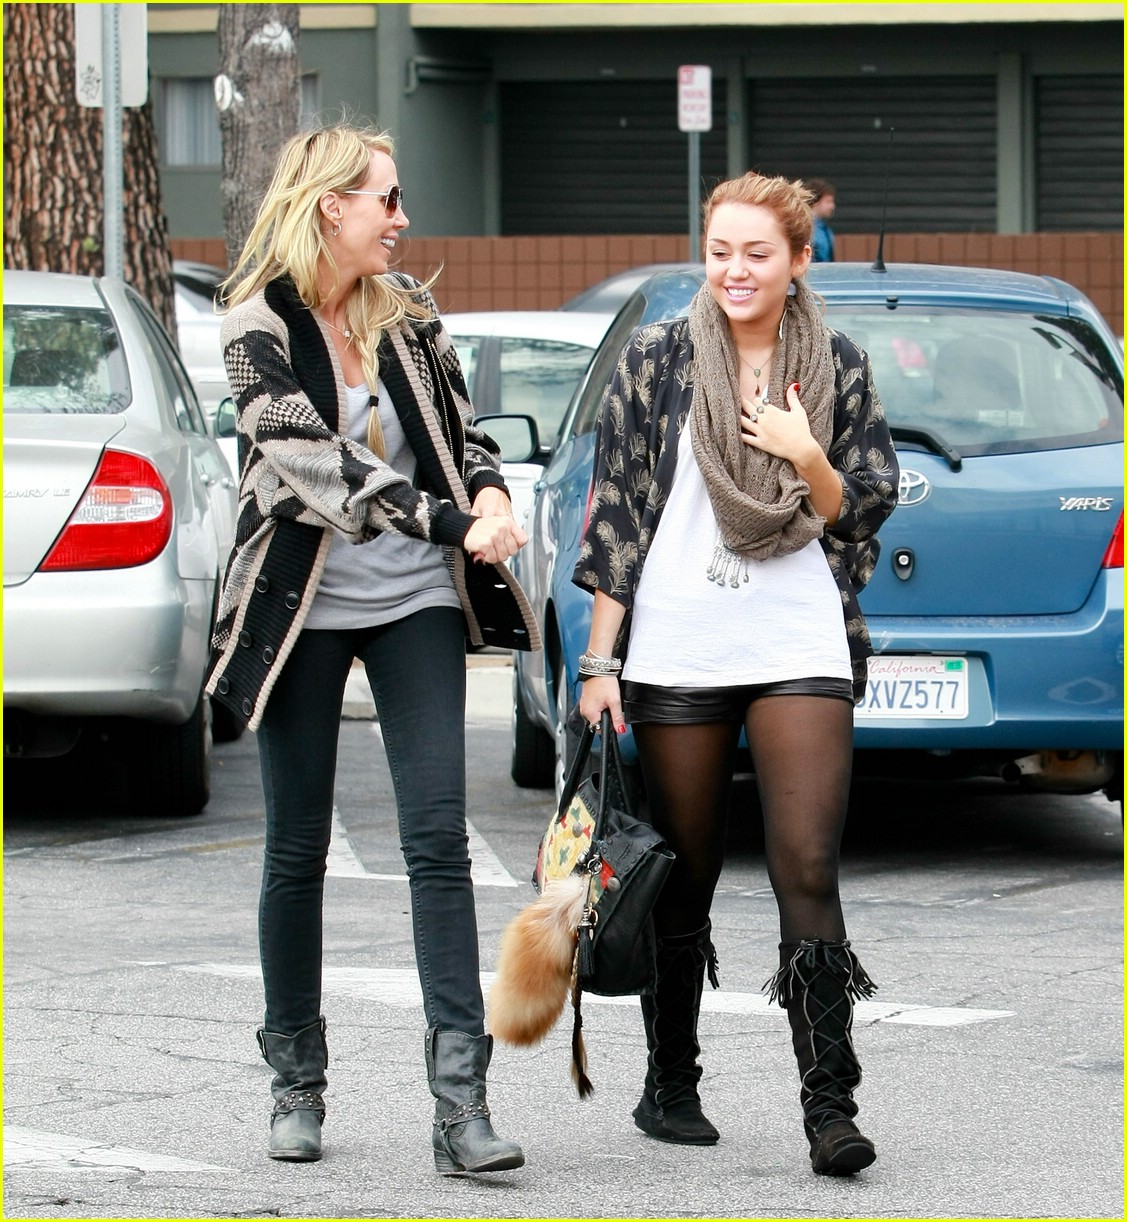 02-15-11, Burbank, CA Actress Miley Cyrus takes her mother Tish to brunch a...